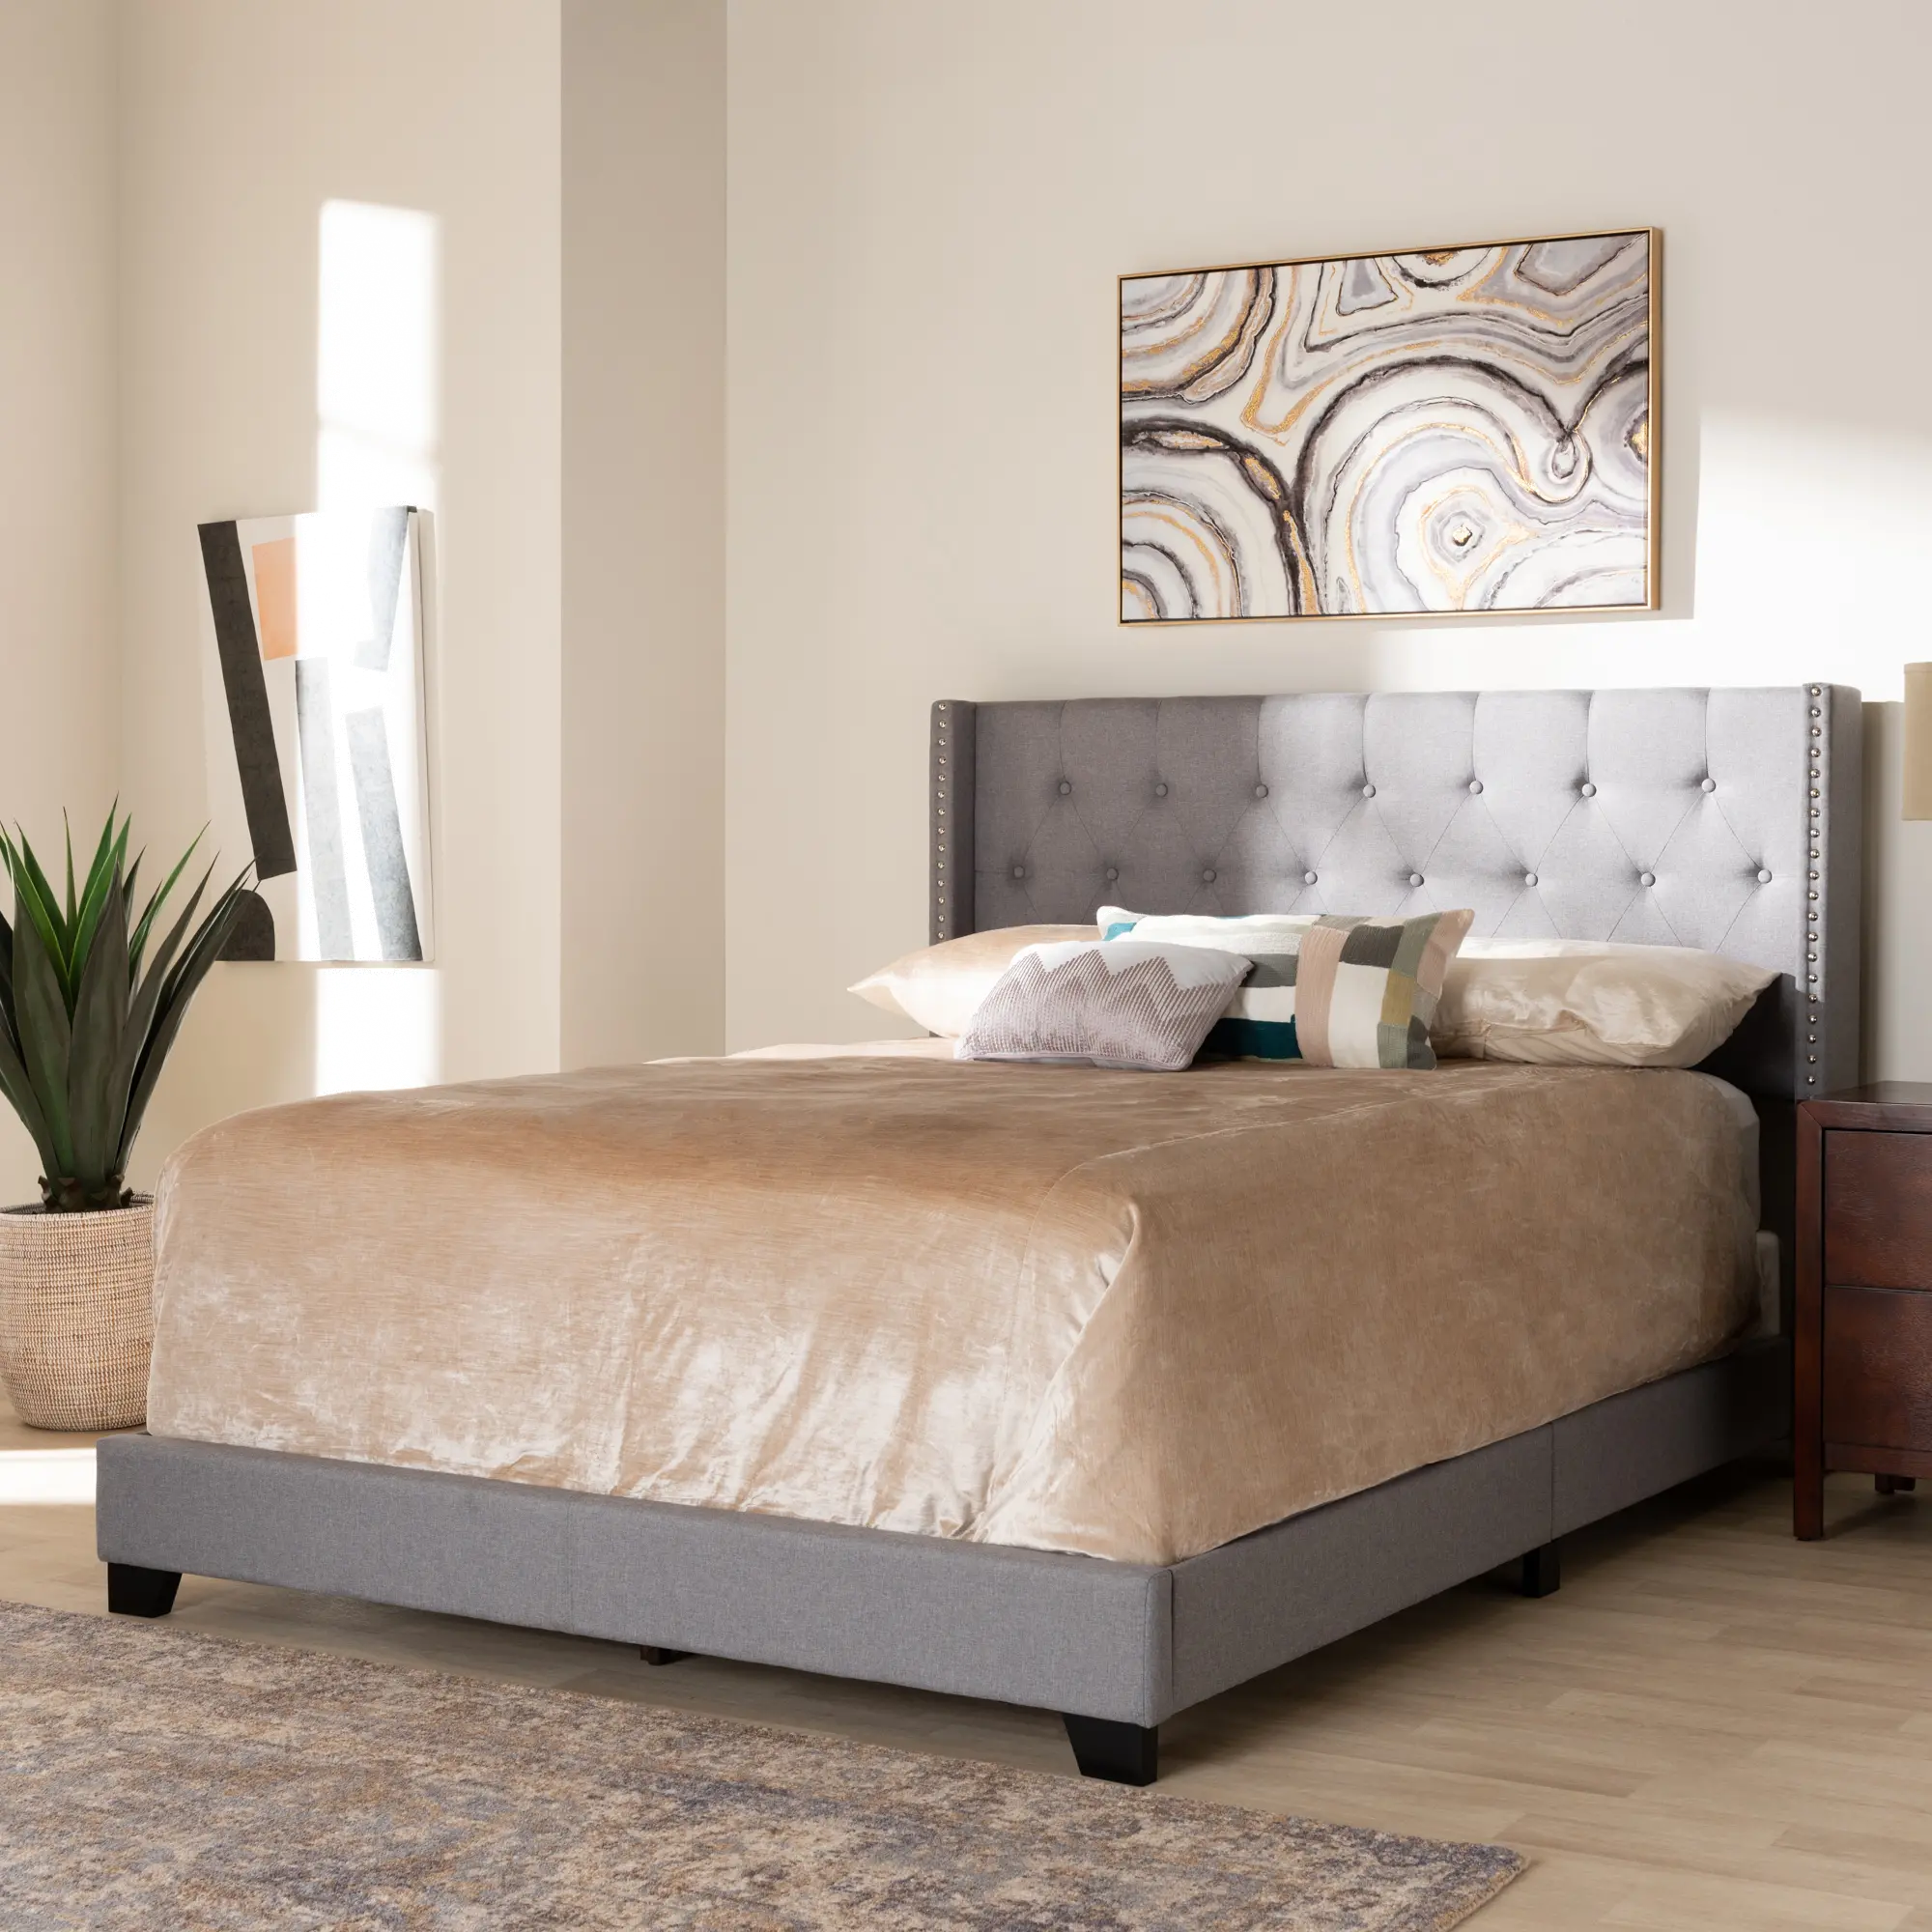 149-8939-RCW Contemporary Light Gray Upholstered Queen Bed - We sku 149-8939-RCW